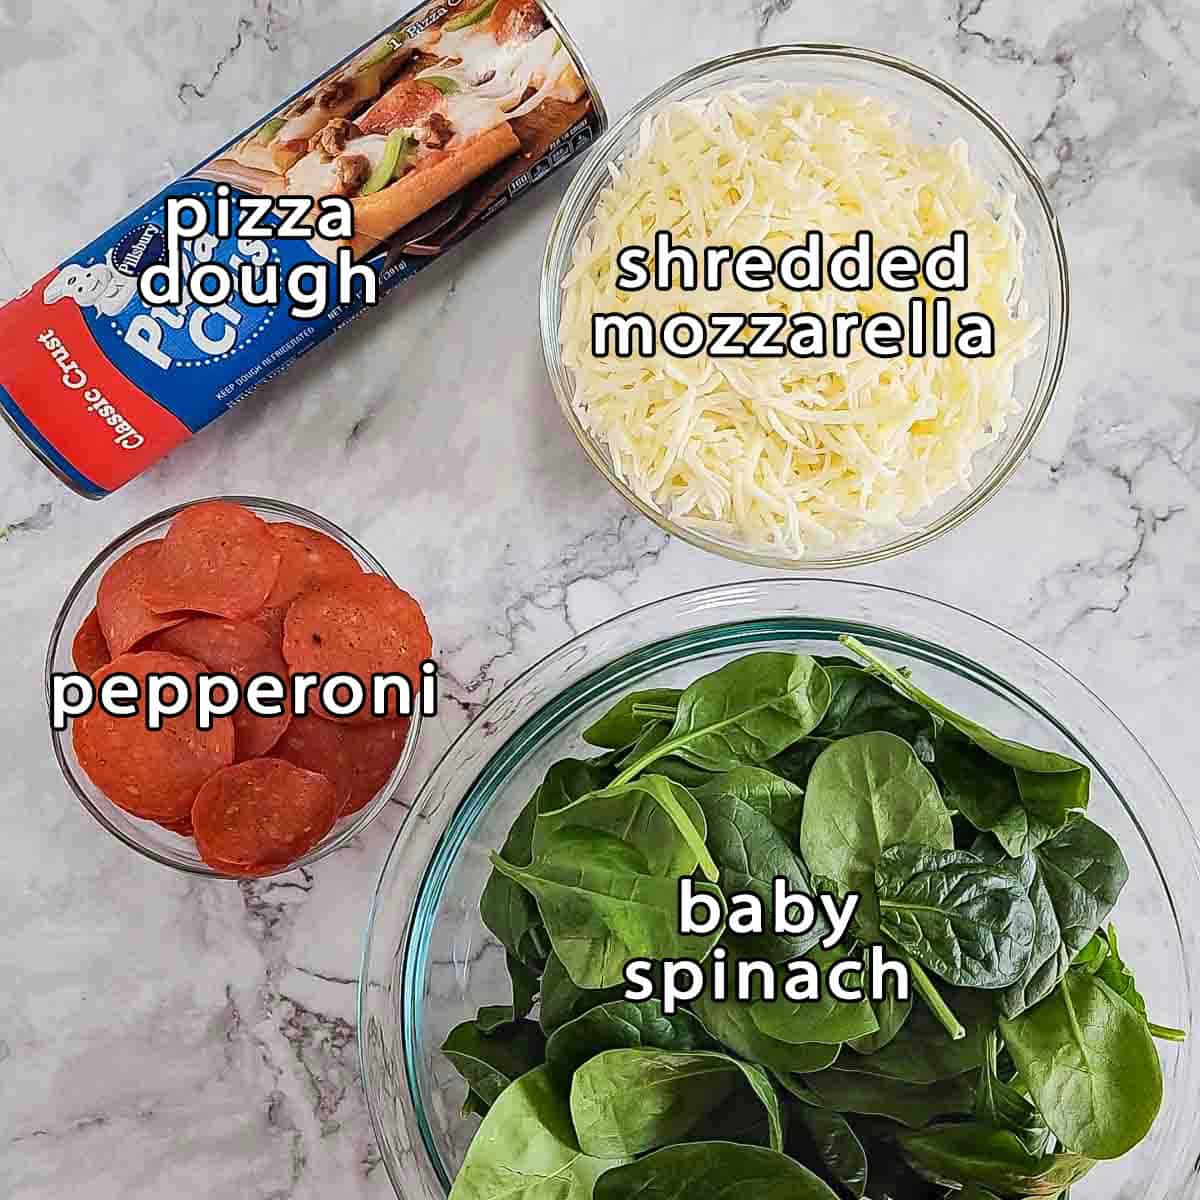 Overhead shot of ingredients - pizza dough, shredded mozzarella, pepperoni, and baby spinach.